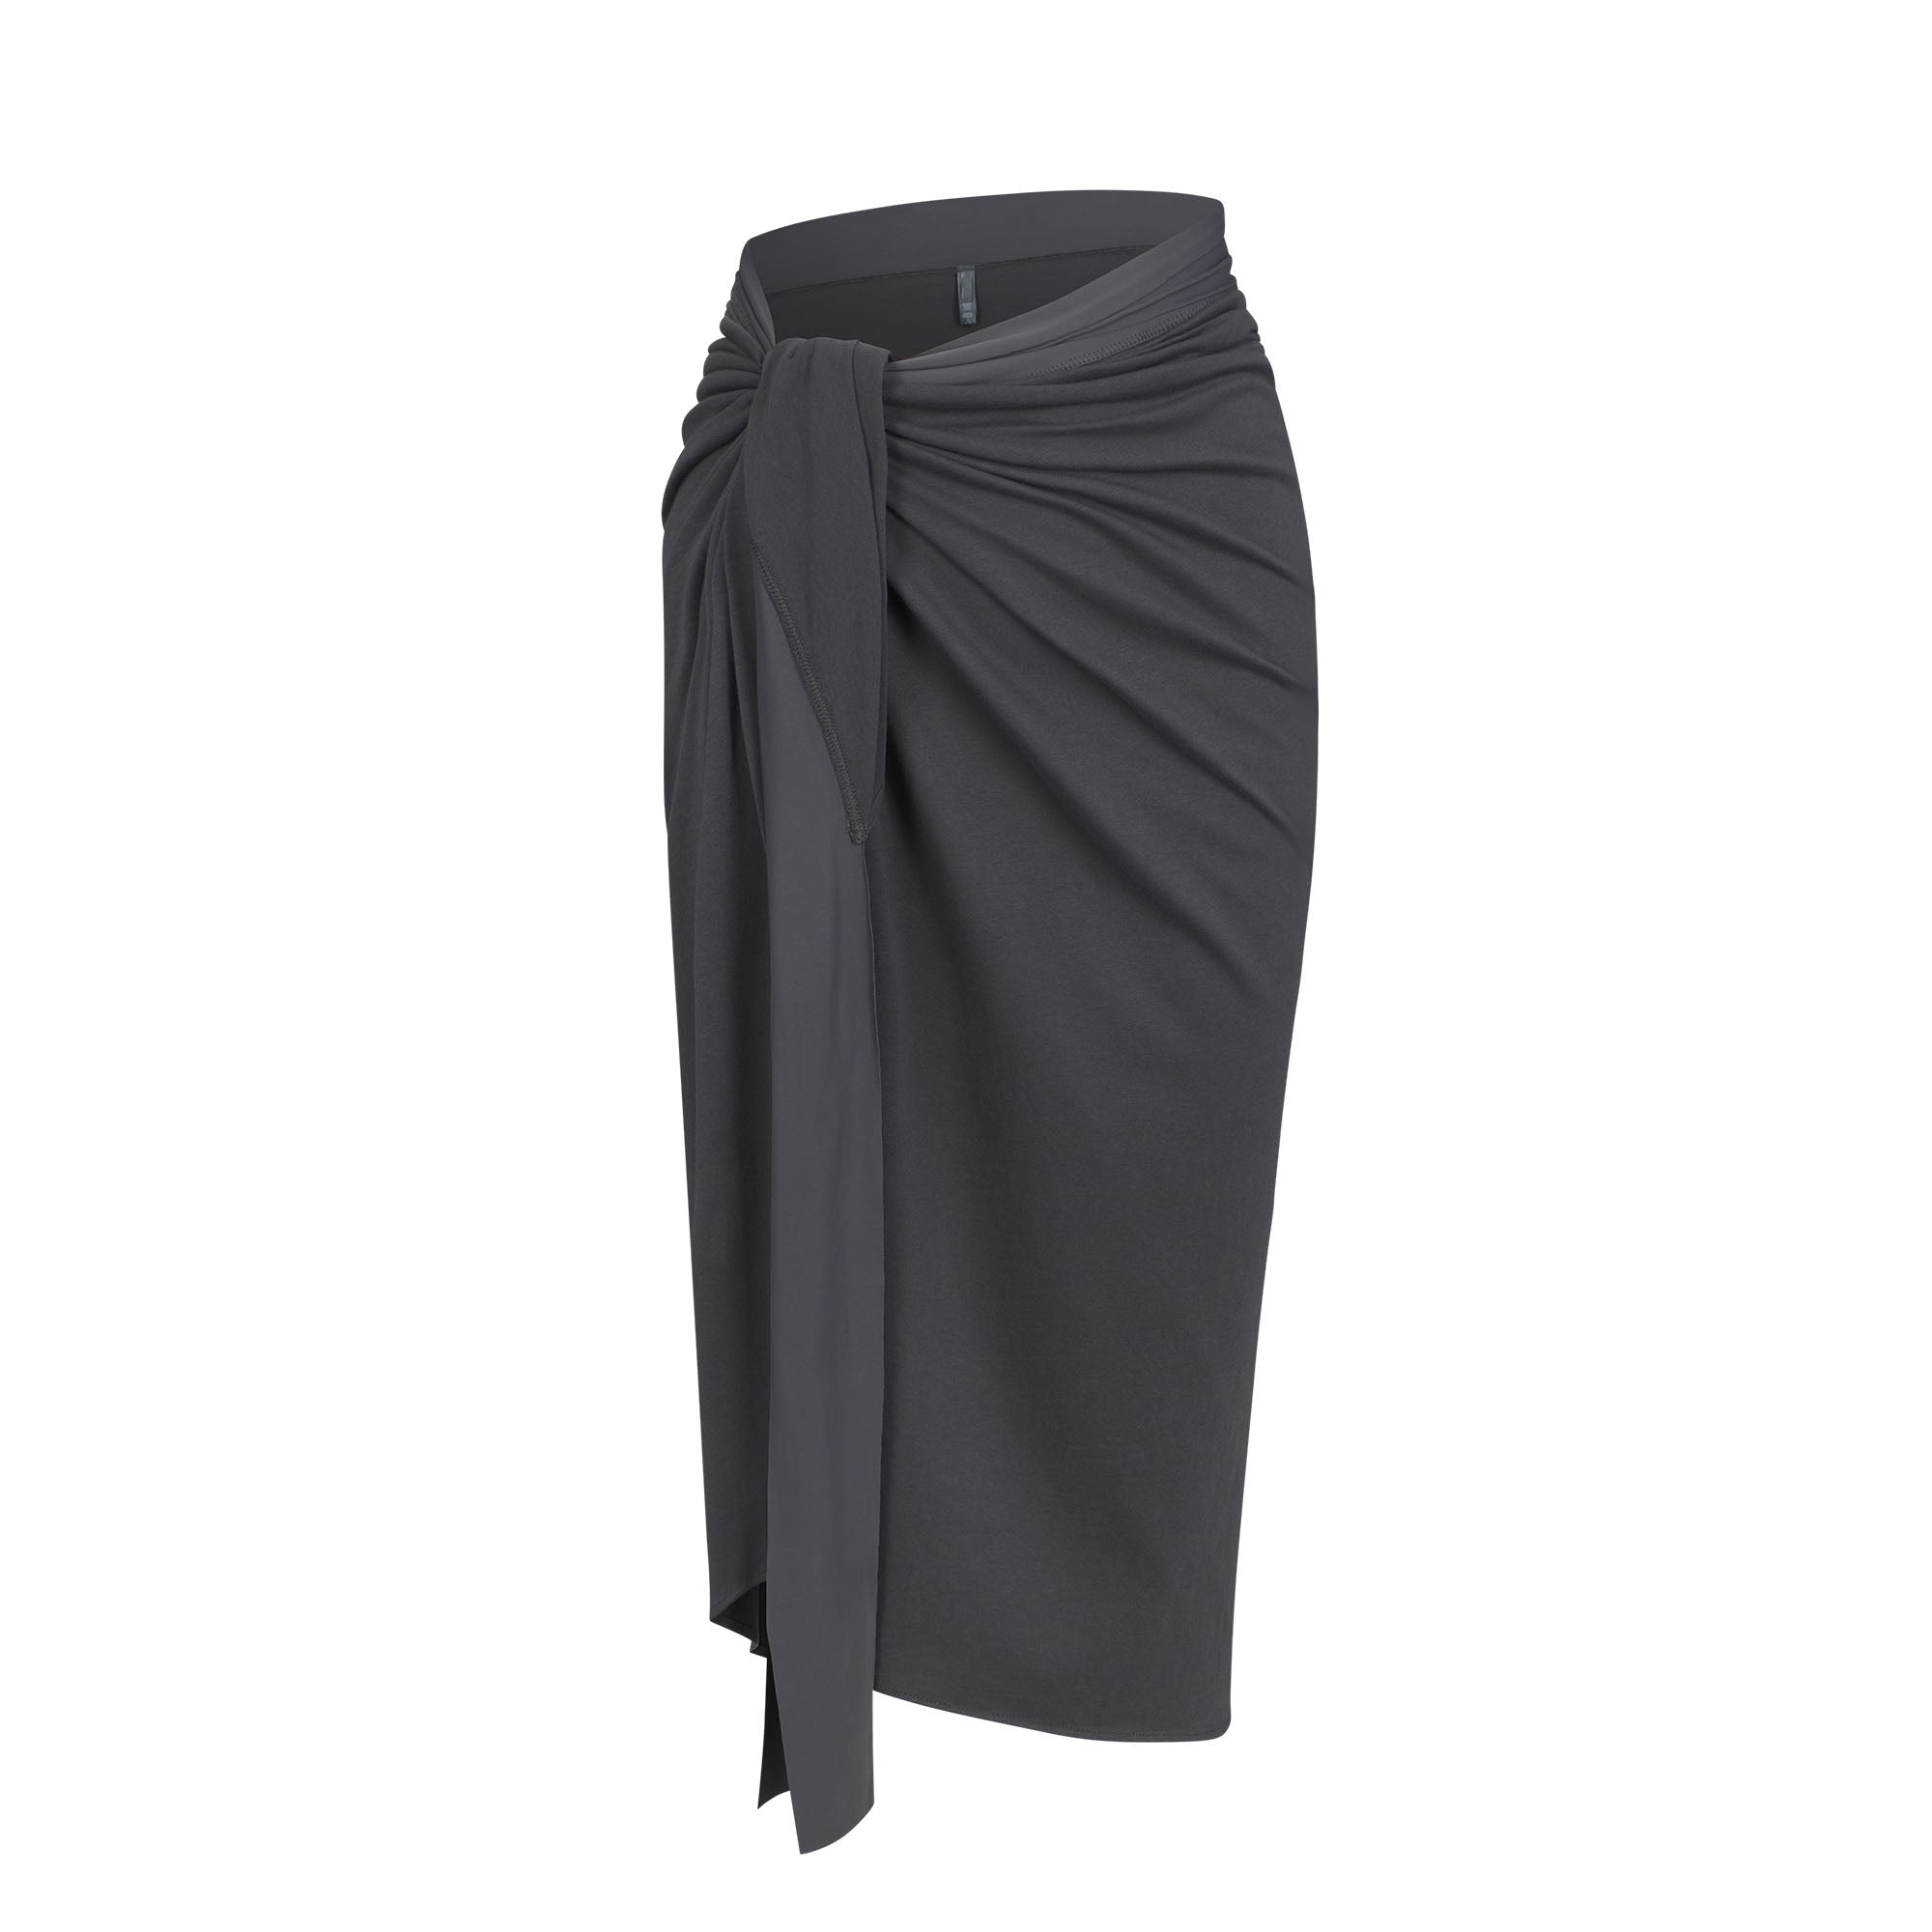 COVER UP TIE SARONG SKIRT | GUNMETAL - COVER UP TIE SARONG SKIRT | GUNMETAL